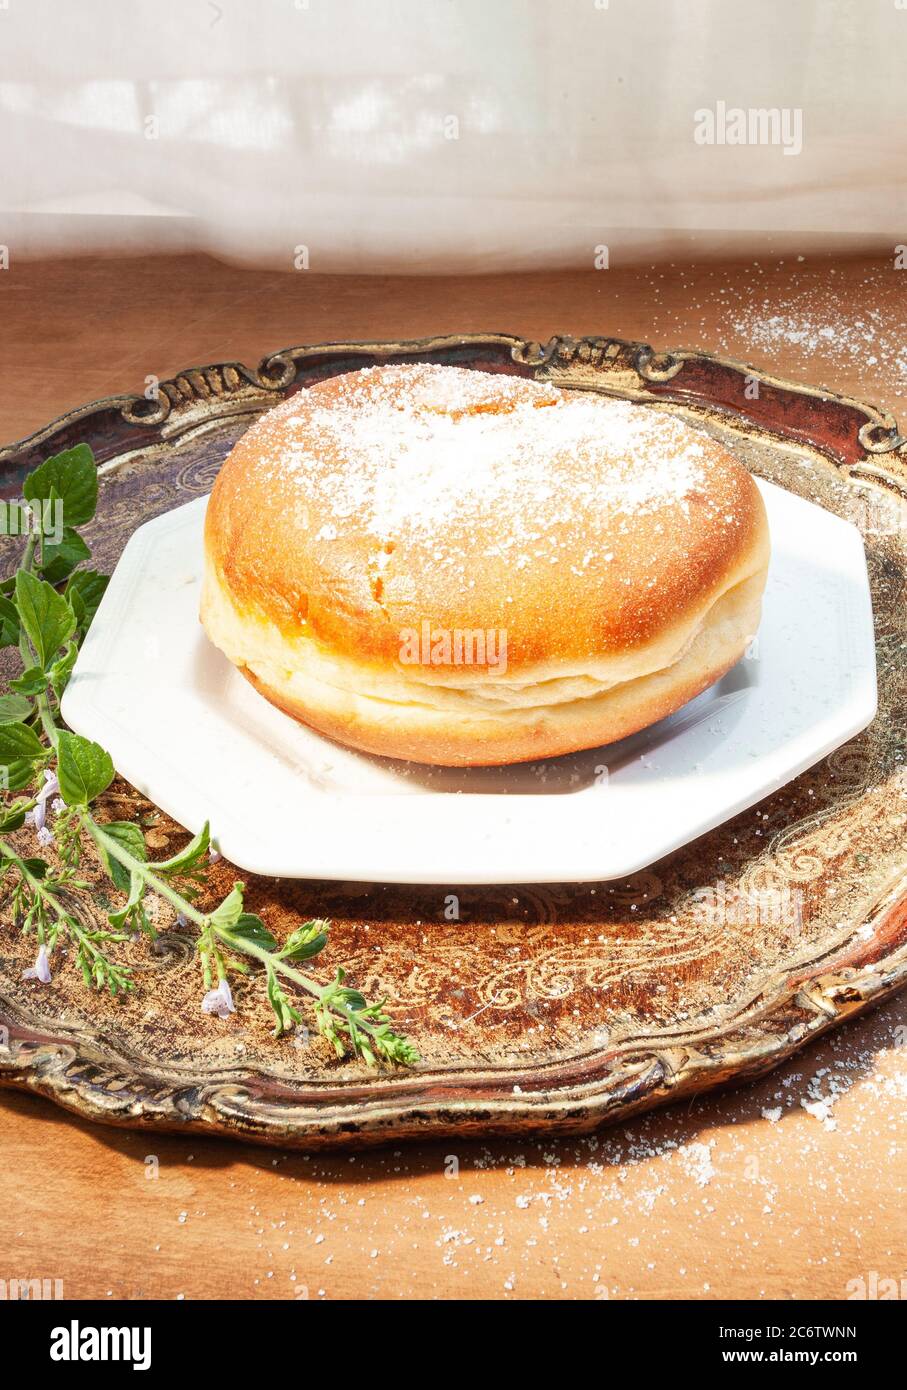 The famous giant krapfen from Trojane, in Slovenian Lower Styria Stock Photo